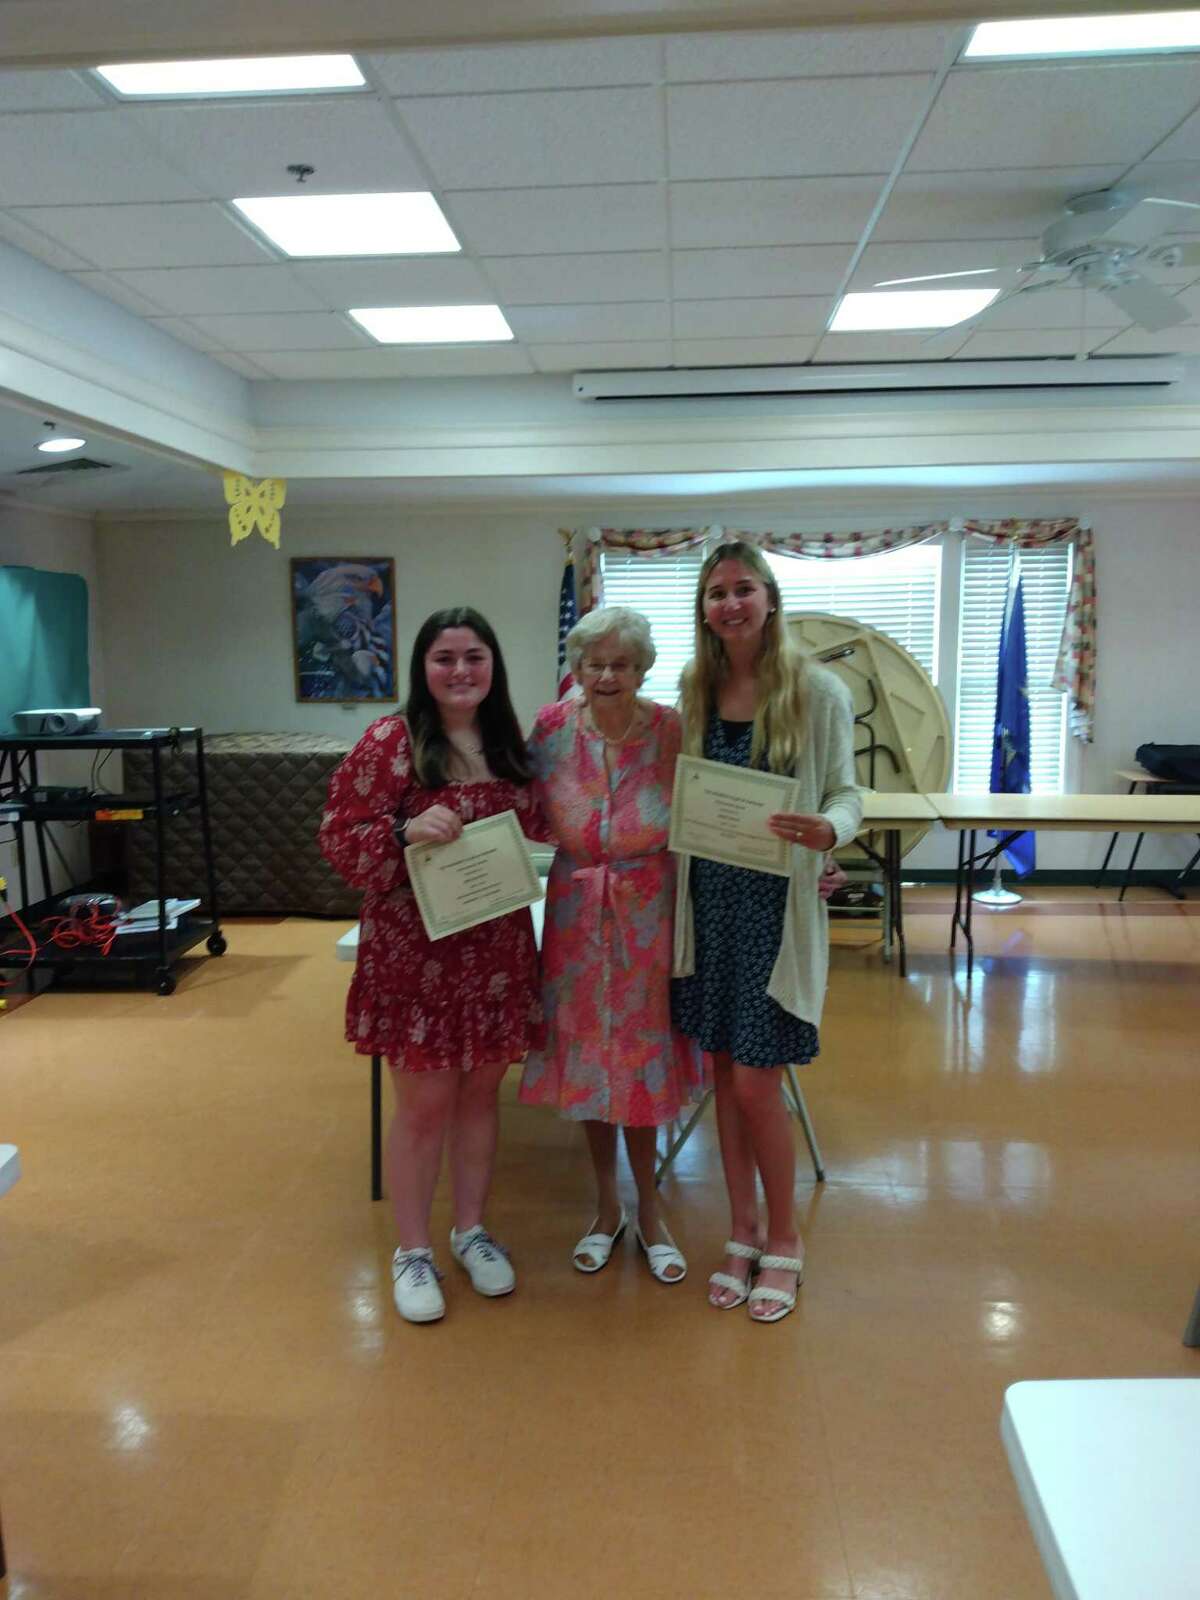 The Women's Club of Cheshire awarded two scholarships: to a student and a teacher; both from Cheshire High School. Anna Proto is attending Southern University. She will be furthering her adult education in the Business field. Erin Esposito is majoring in marketing. From left are Erin Esposito, member Jane Richards center and Anna Proto.